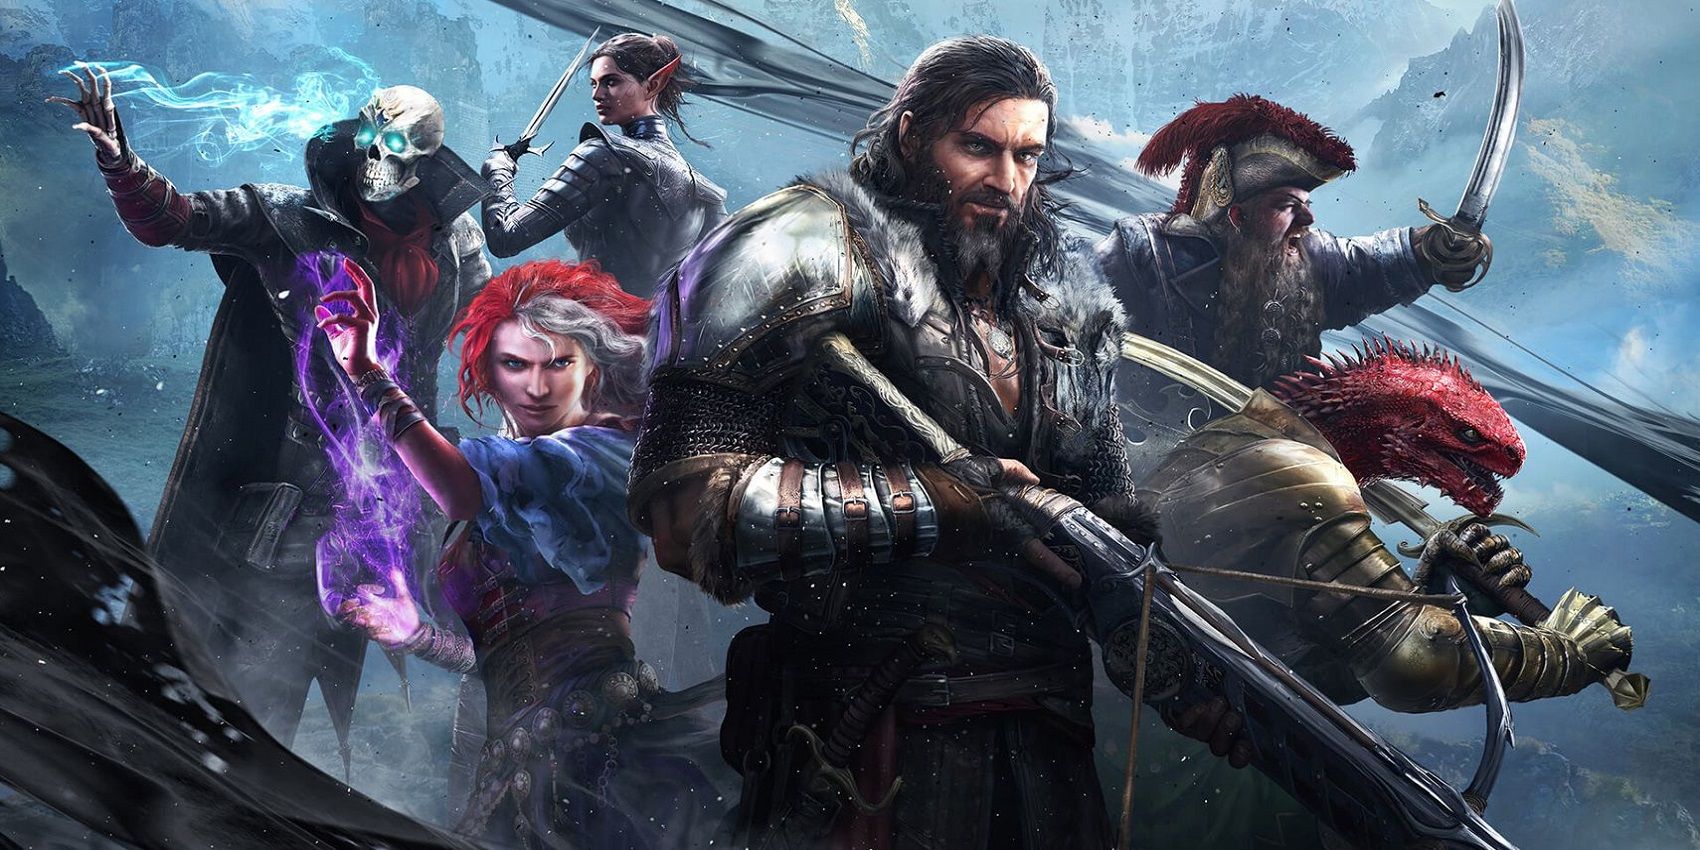 Divinity Original Sin 2 The Main Characters Left to Right Fane, Lohse, Sebille, Ifan Ben Mezd, Beast, and The Red Prince